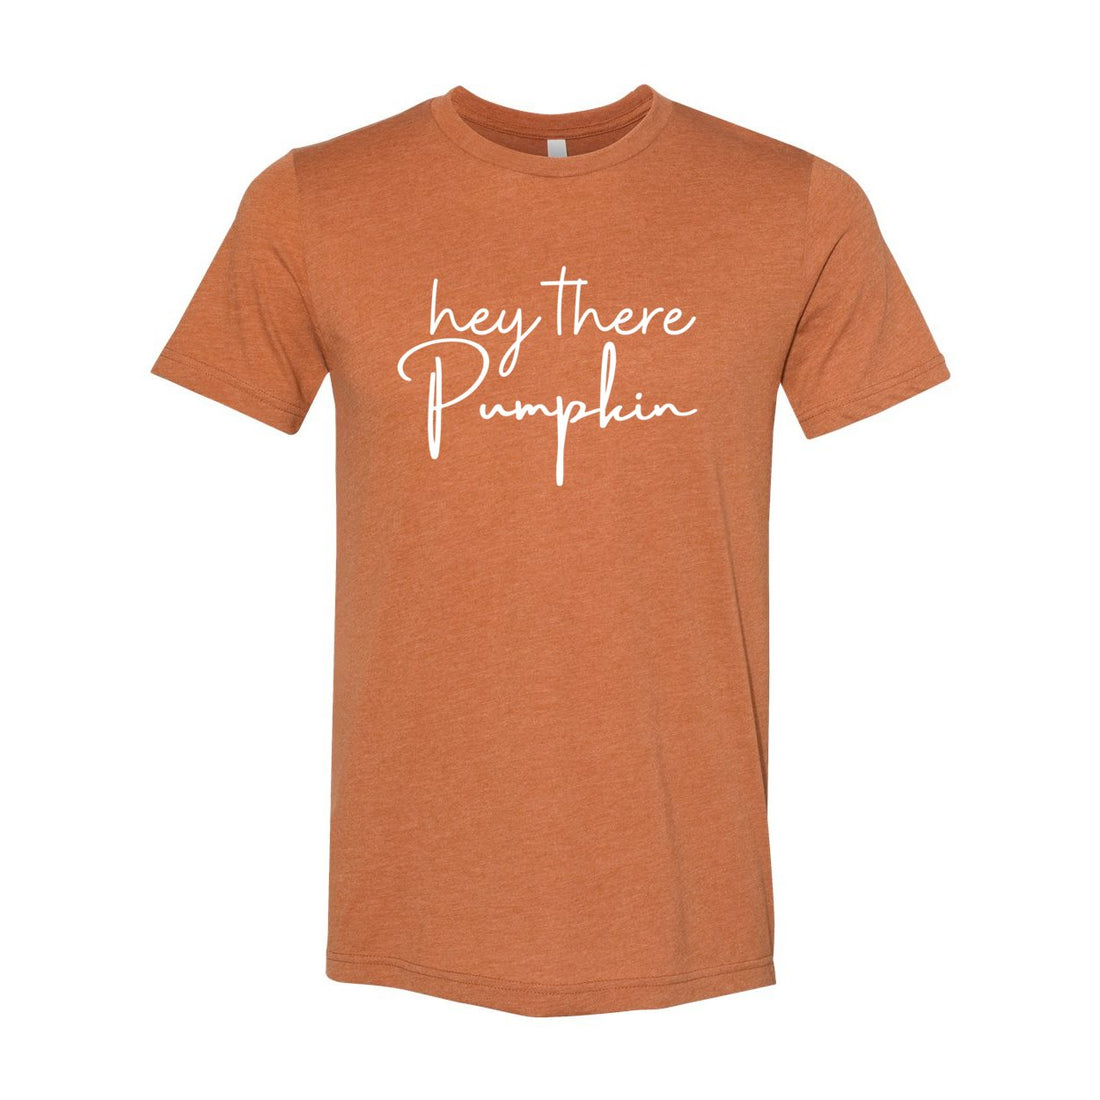 Hey There Pumpkin - T-Shirts - Positively Sassy - Hey There Pumpkin